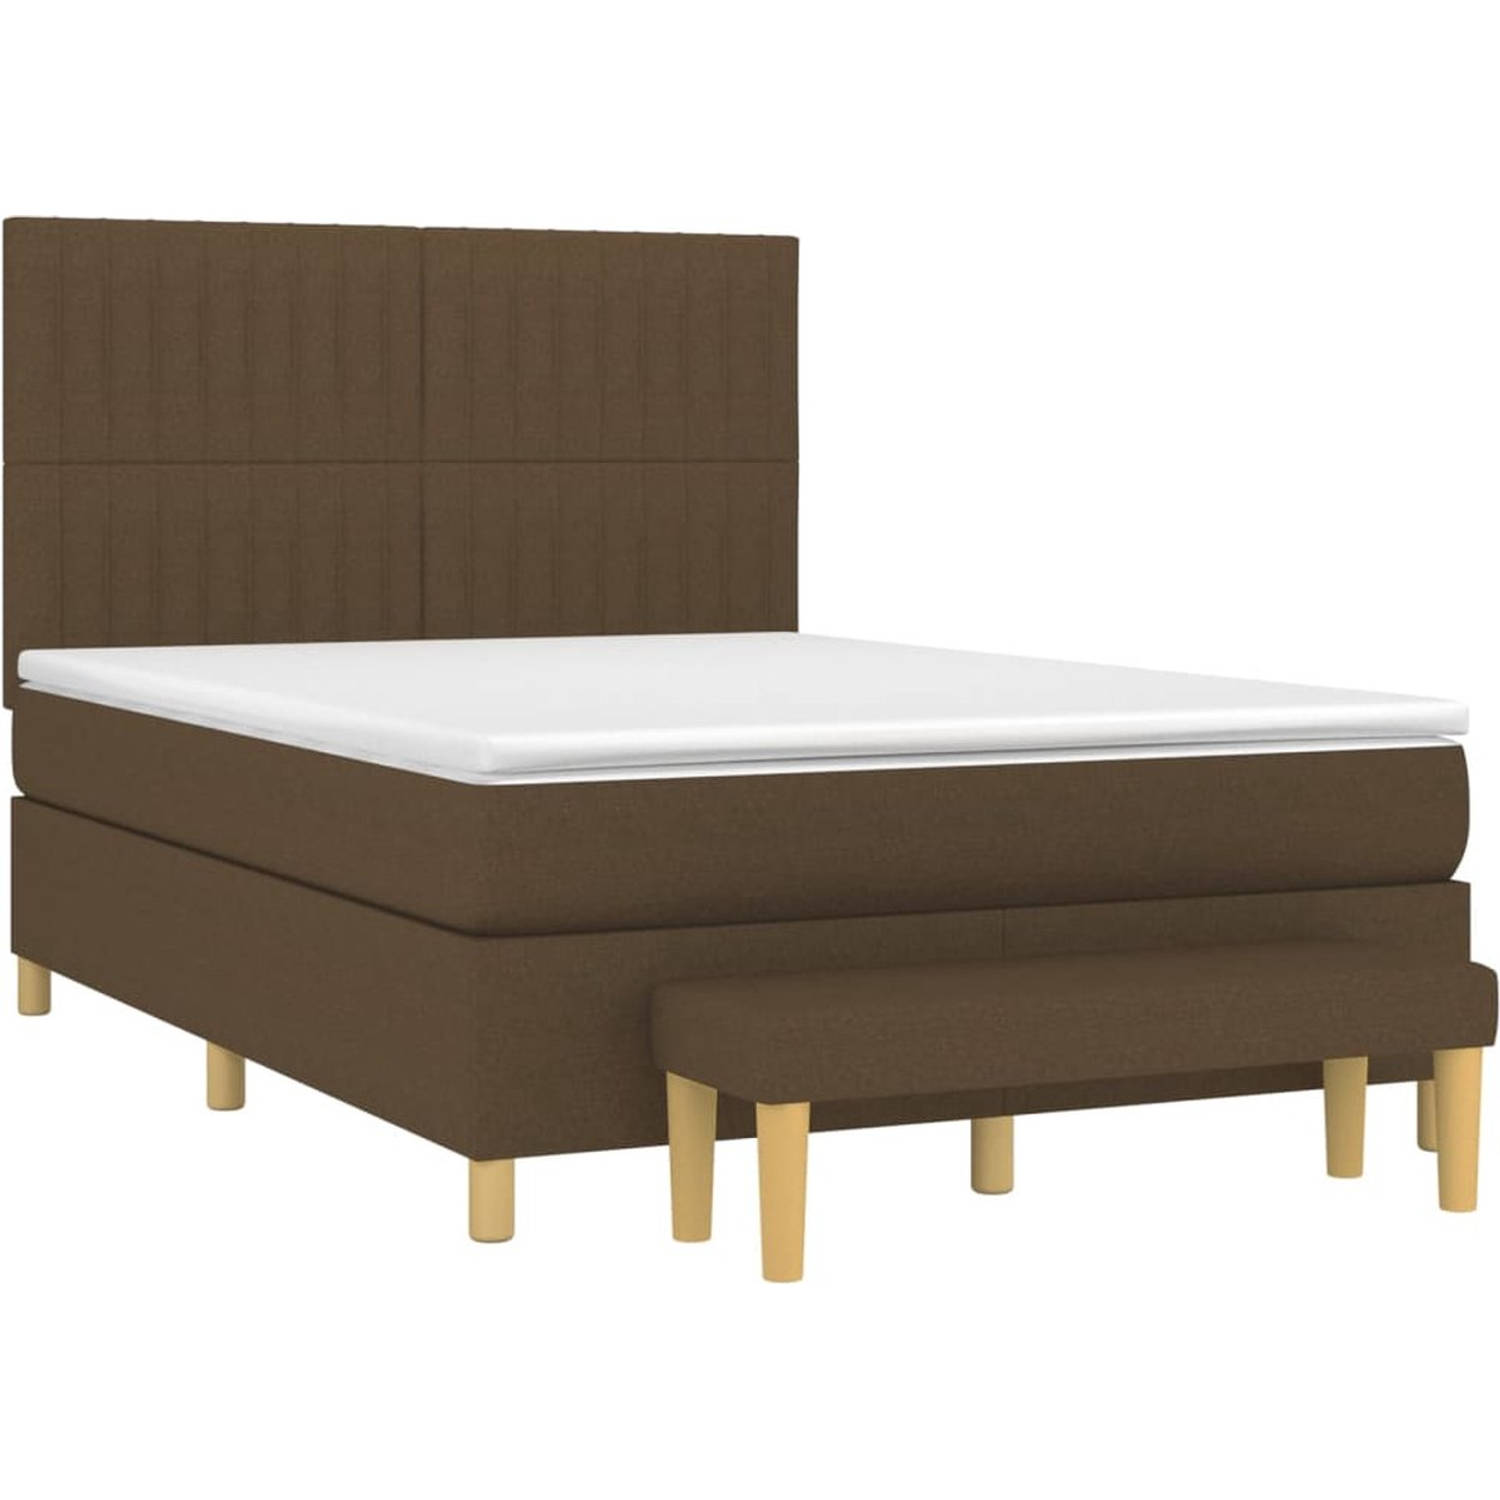 The Living Store Boxspringbed s - Bed - 203 x 144 x 118/128 cm - Donkerbruin